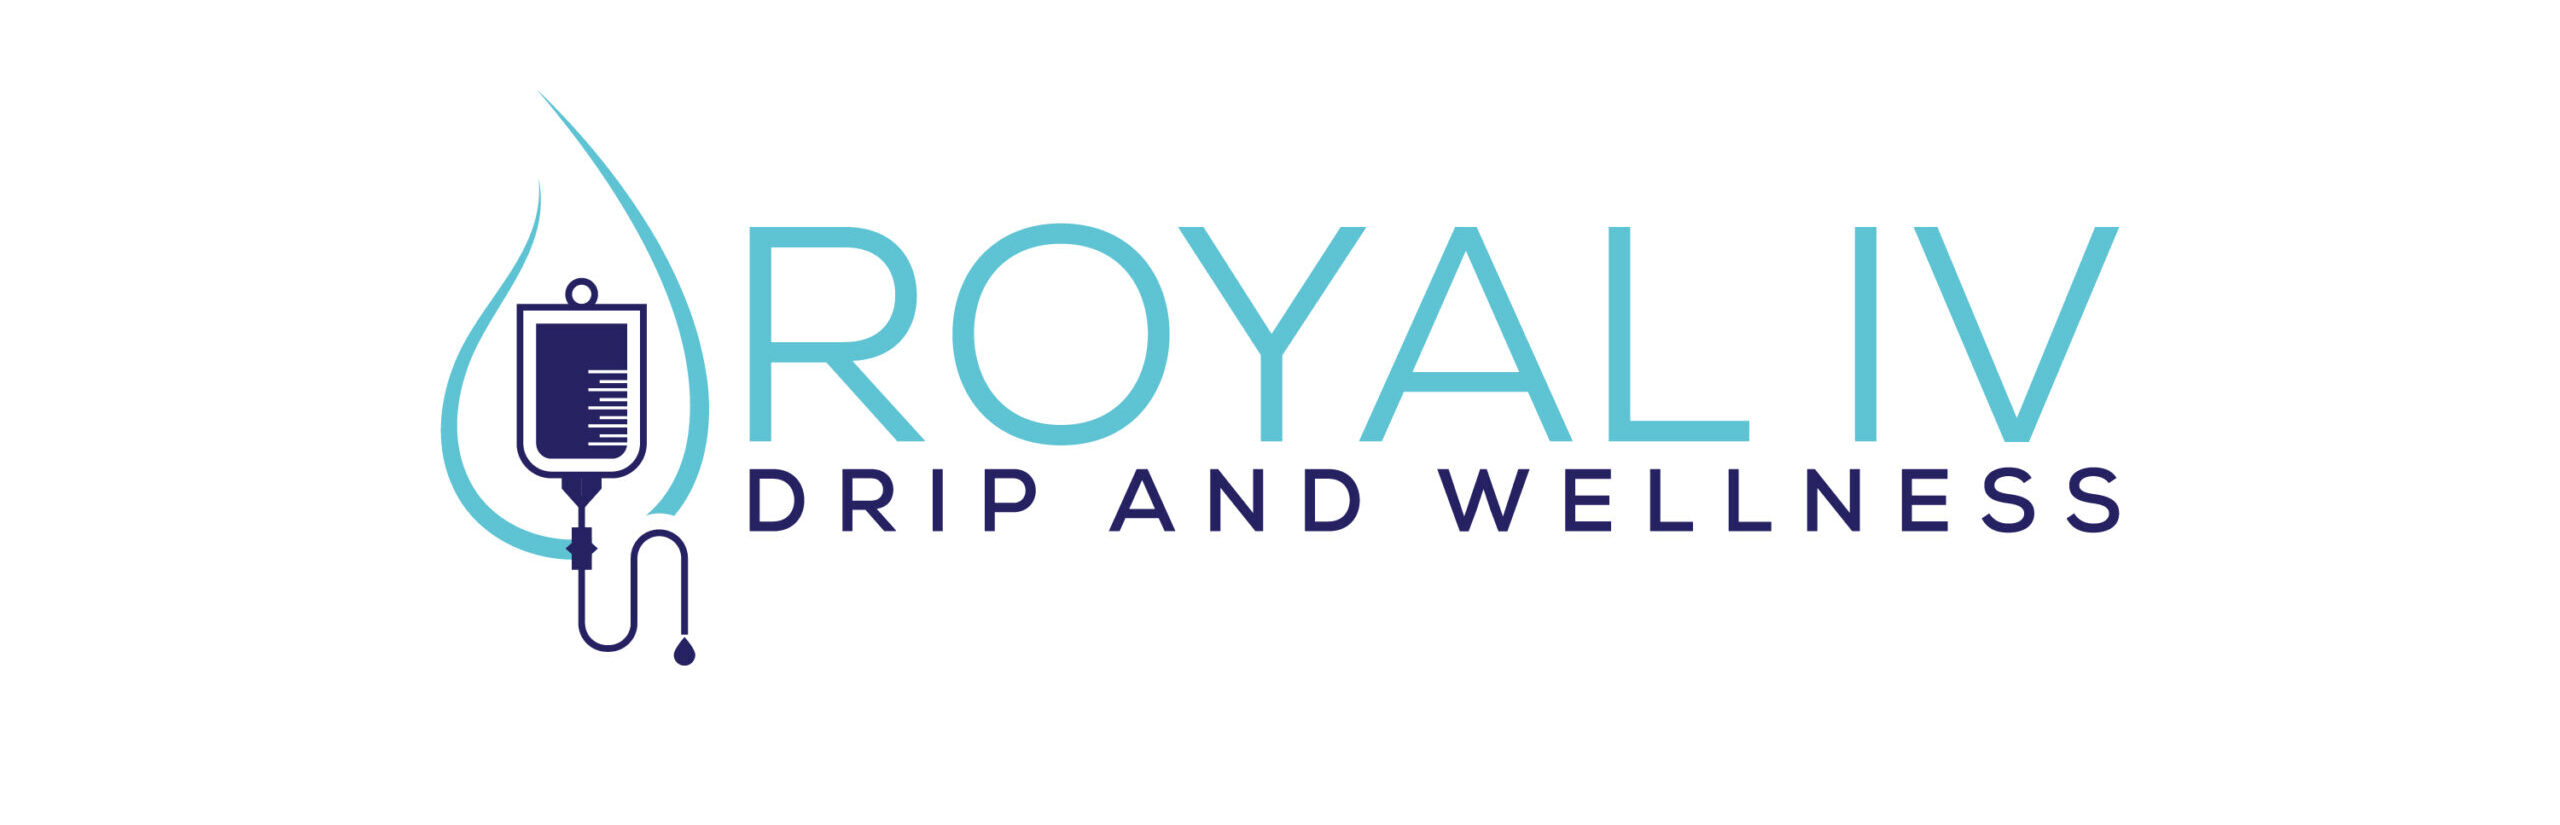 A logo of royal trip and wellness